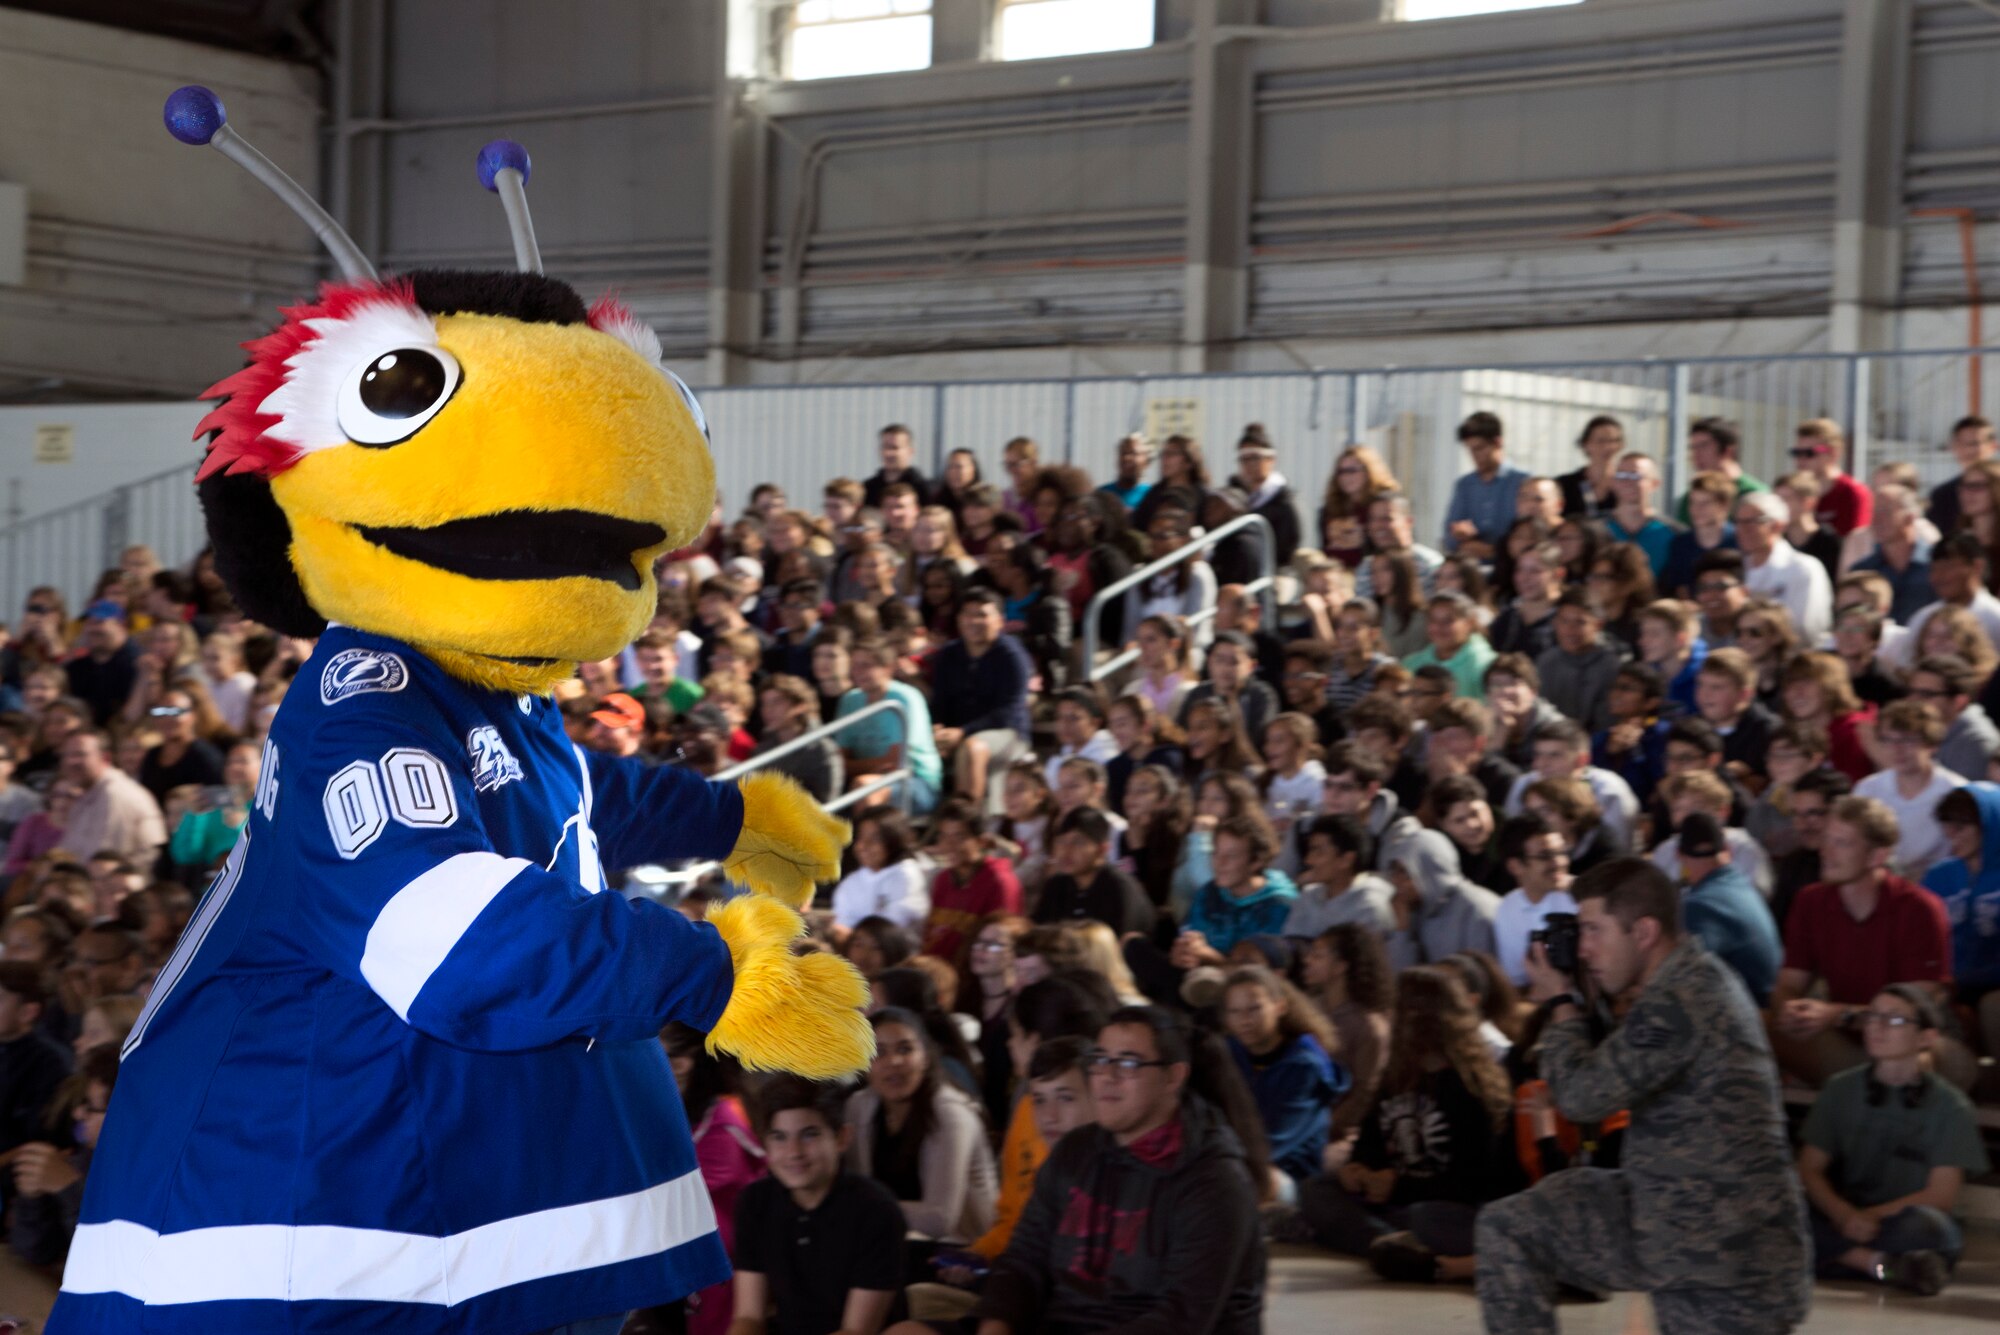 The Tampa Bay Lightning mascot, Thunder Bug, pumps up the crowd during the Science, Technology, Engineering, Arts and Math (STEAM) Day at MacDill Air Force Base, Fla., March 21, 2018.